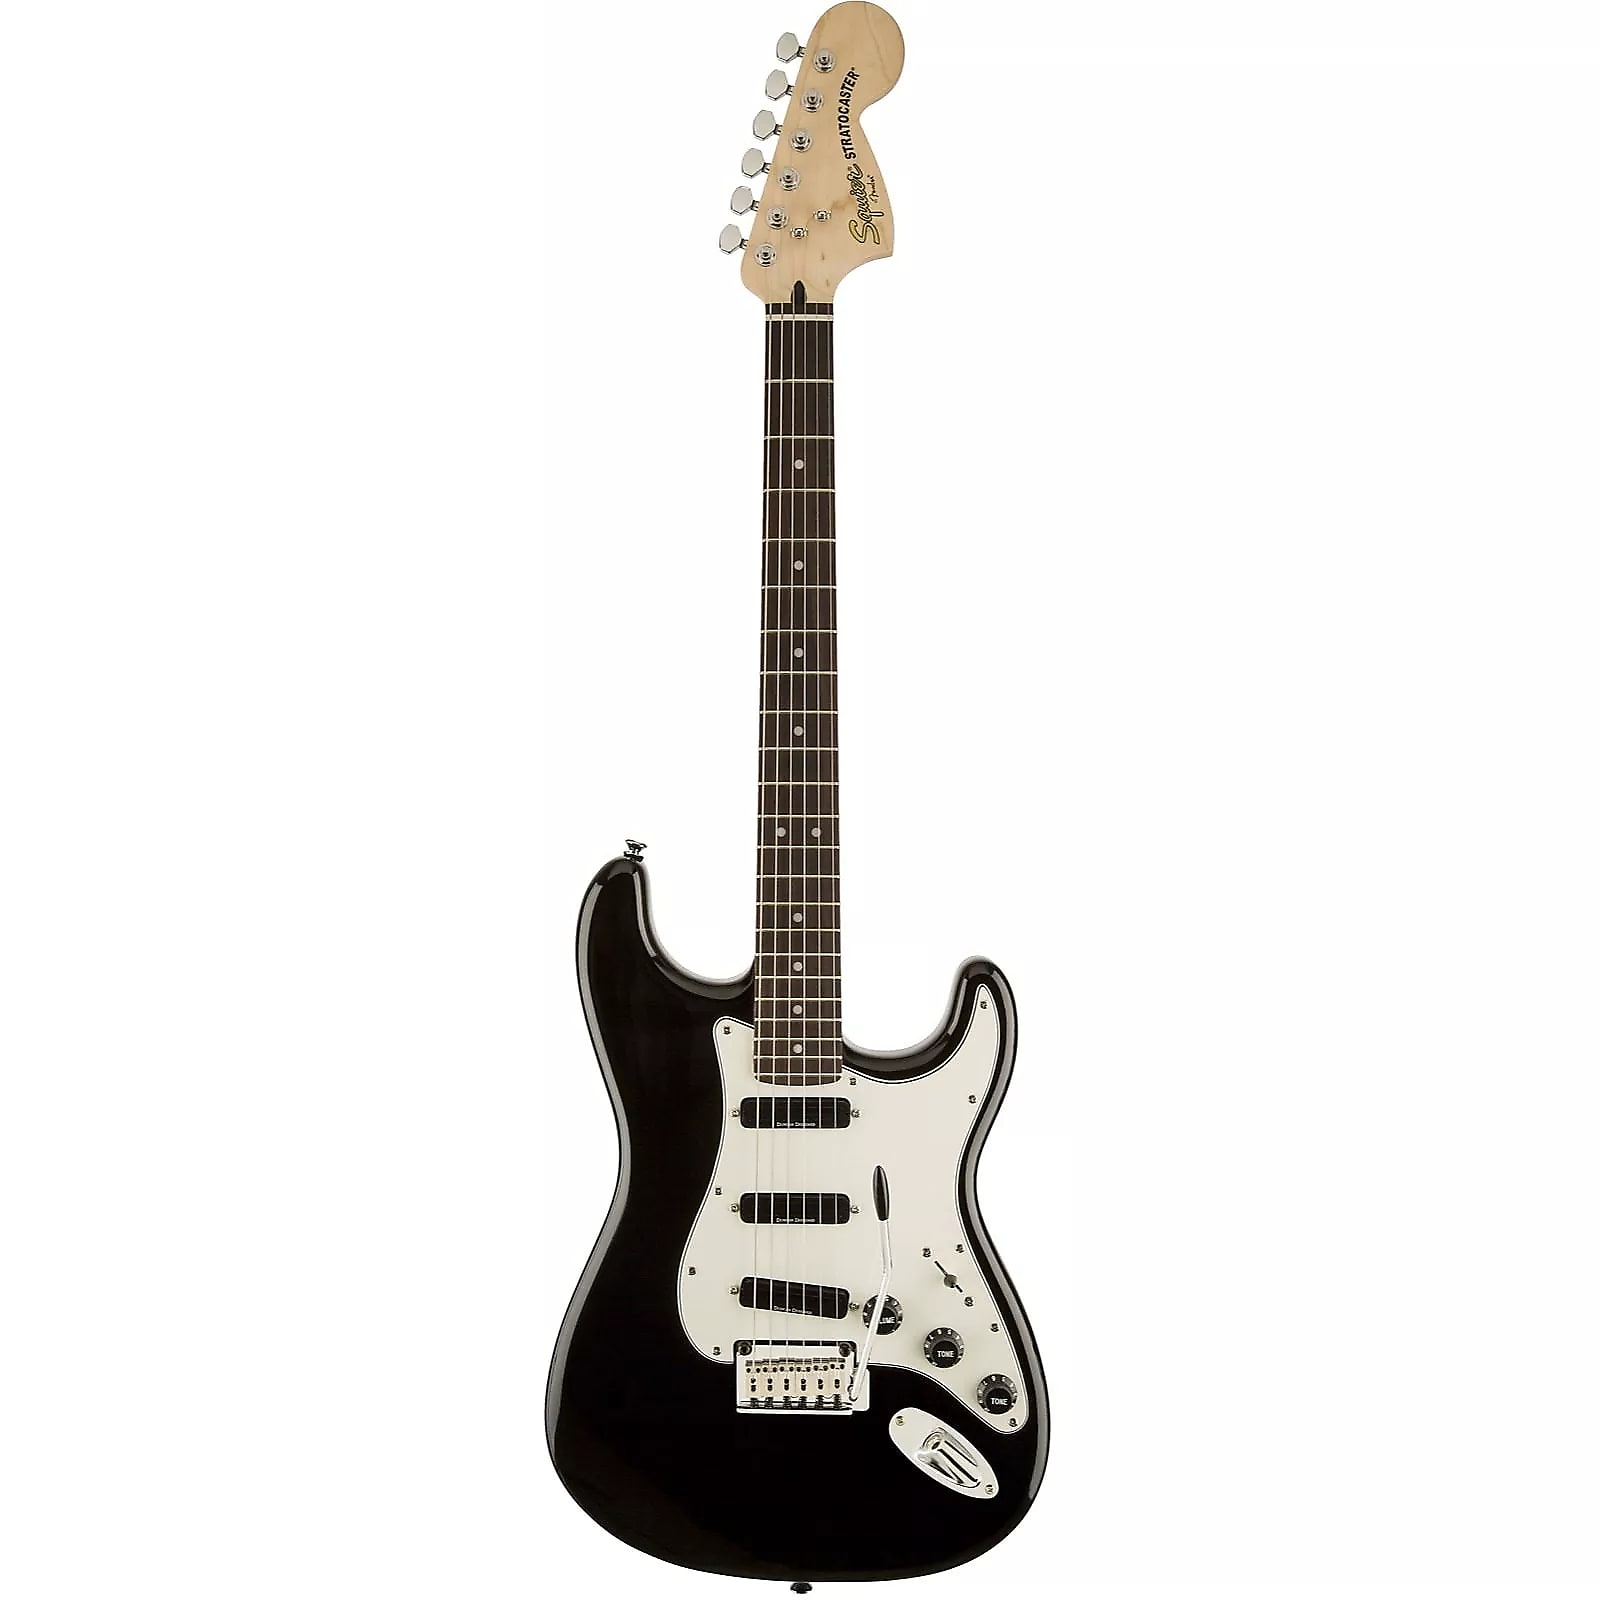 Squier Deluxe Hot Rails Stratocaster | Reverb